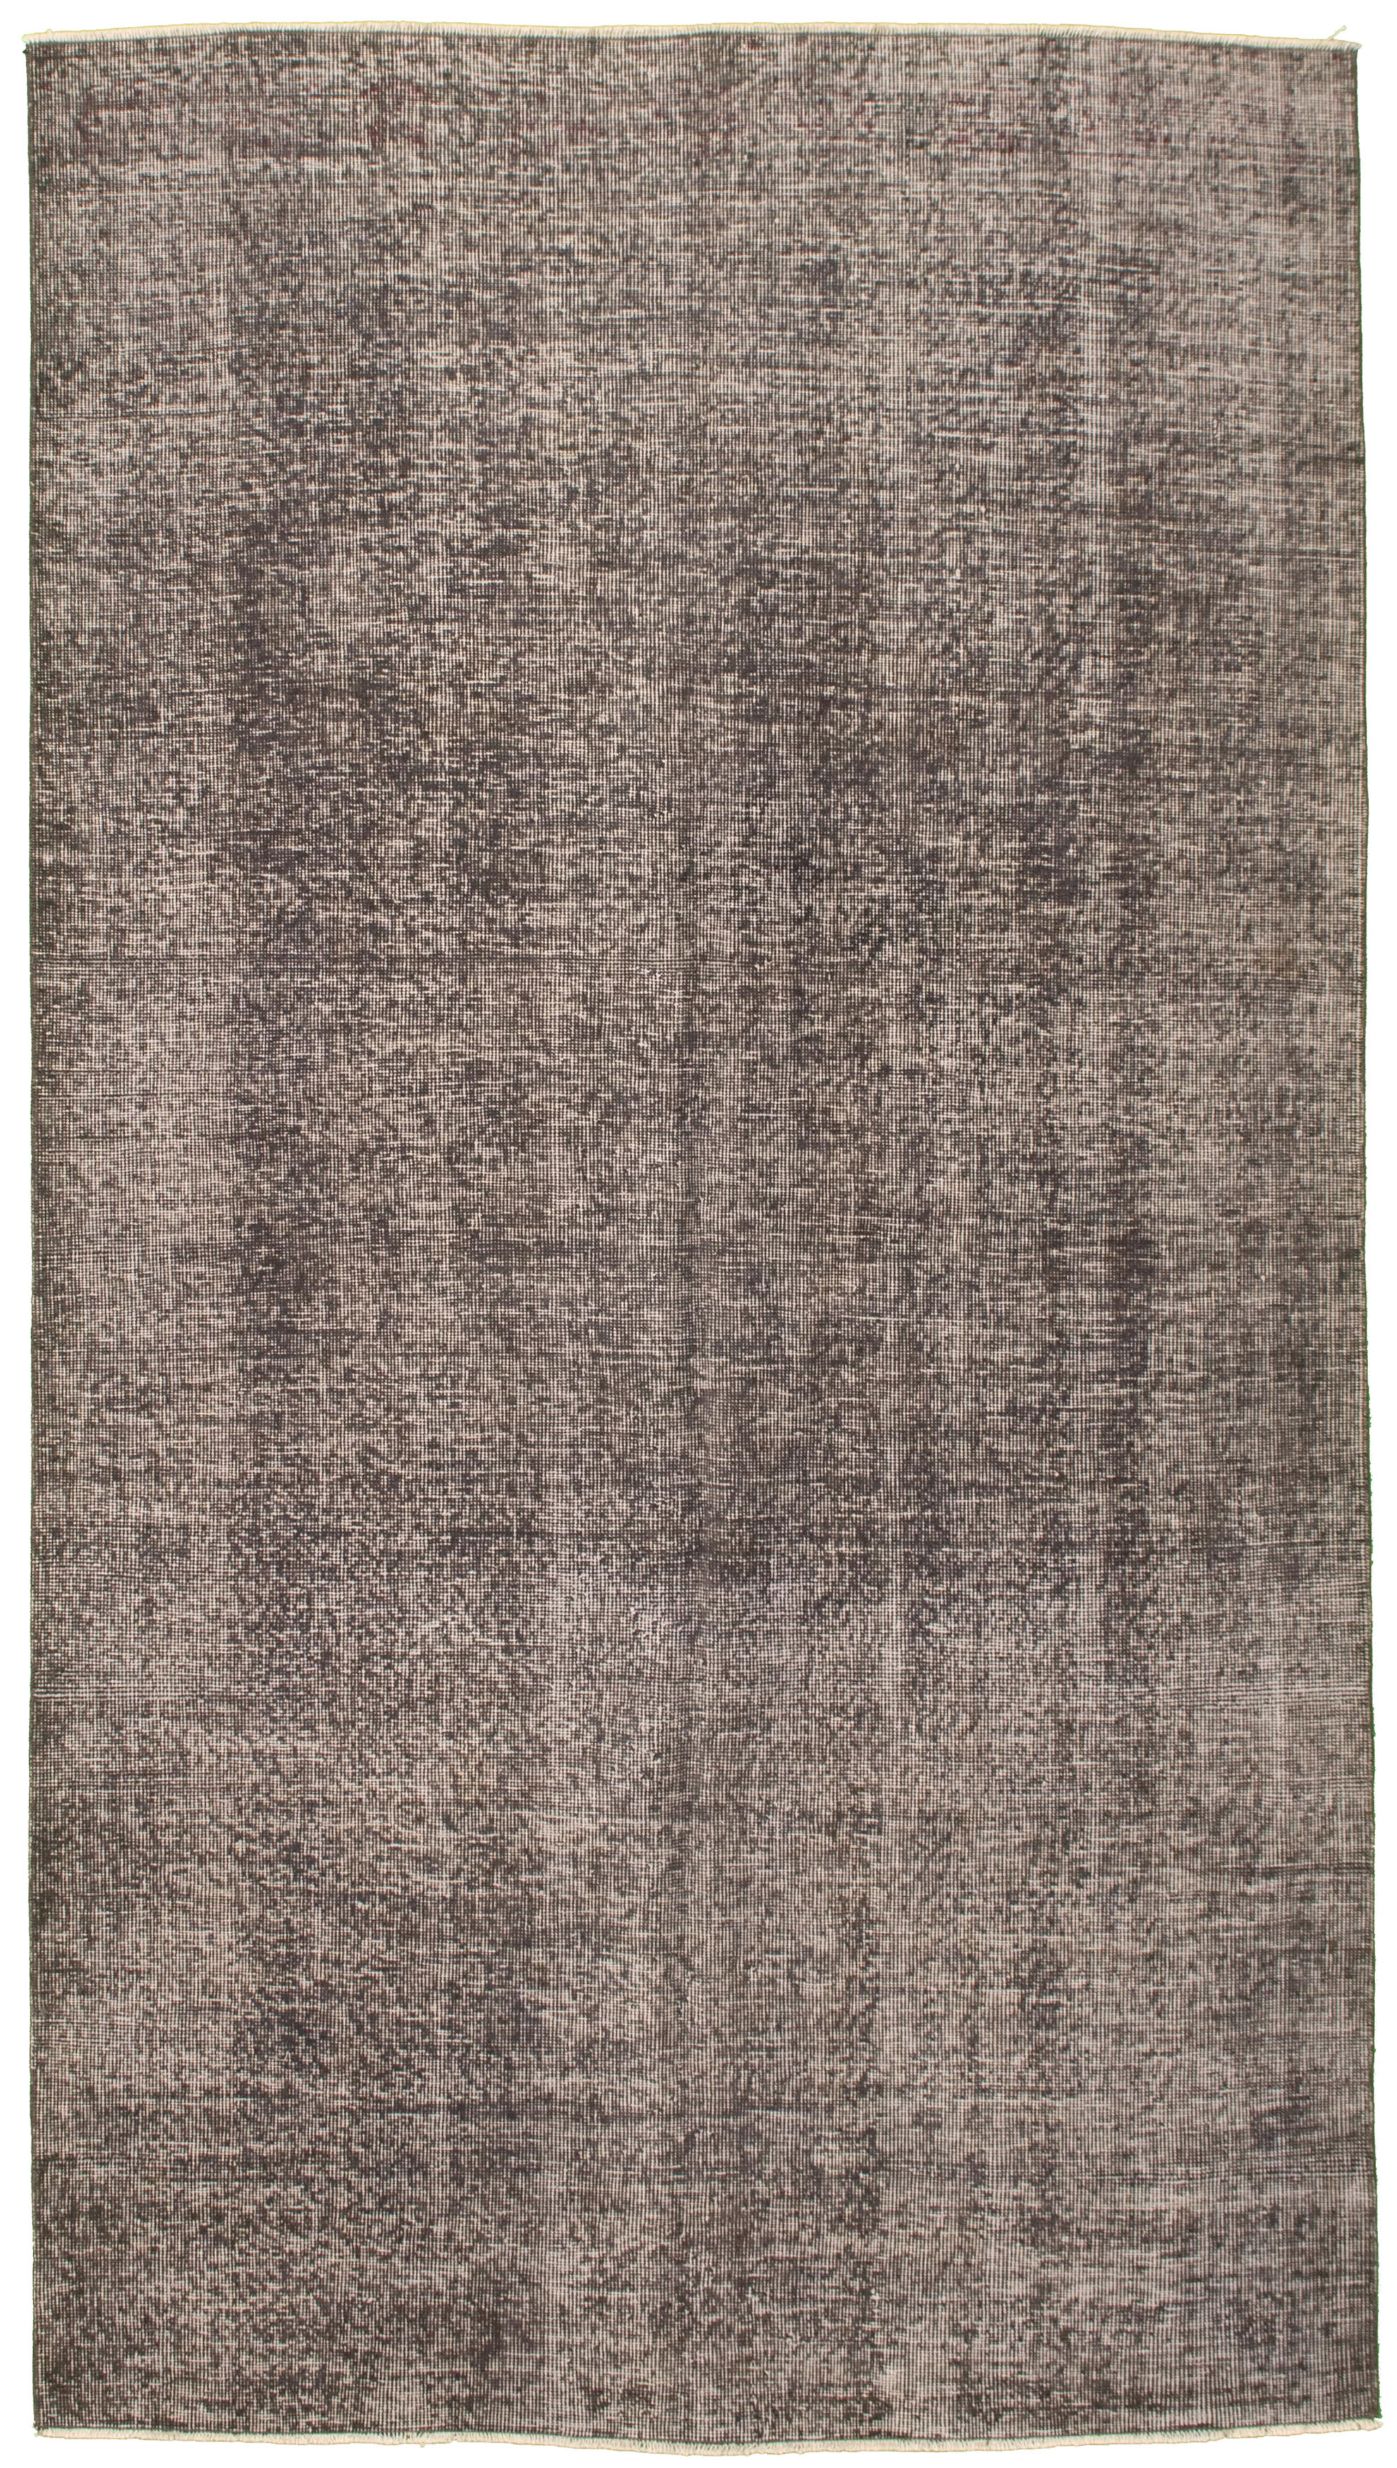 Hand-knotted Color Transition Dark Grey Wool Rug 4'8" x 8'4" Size: 4'8" x 8'4"  